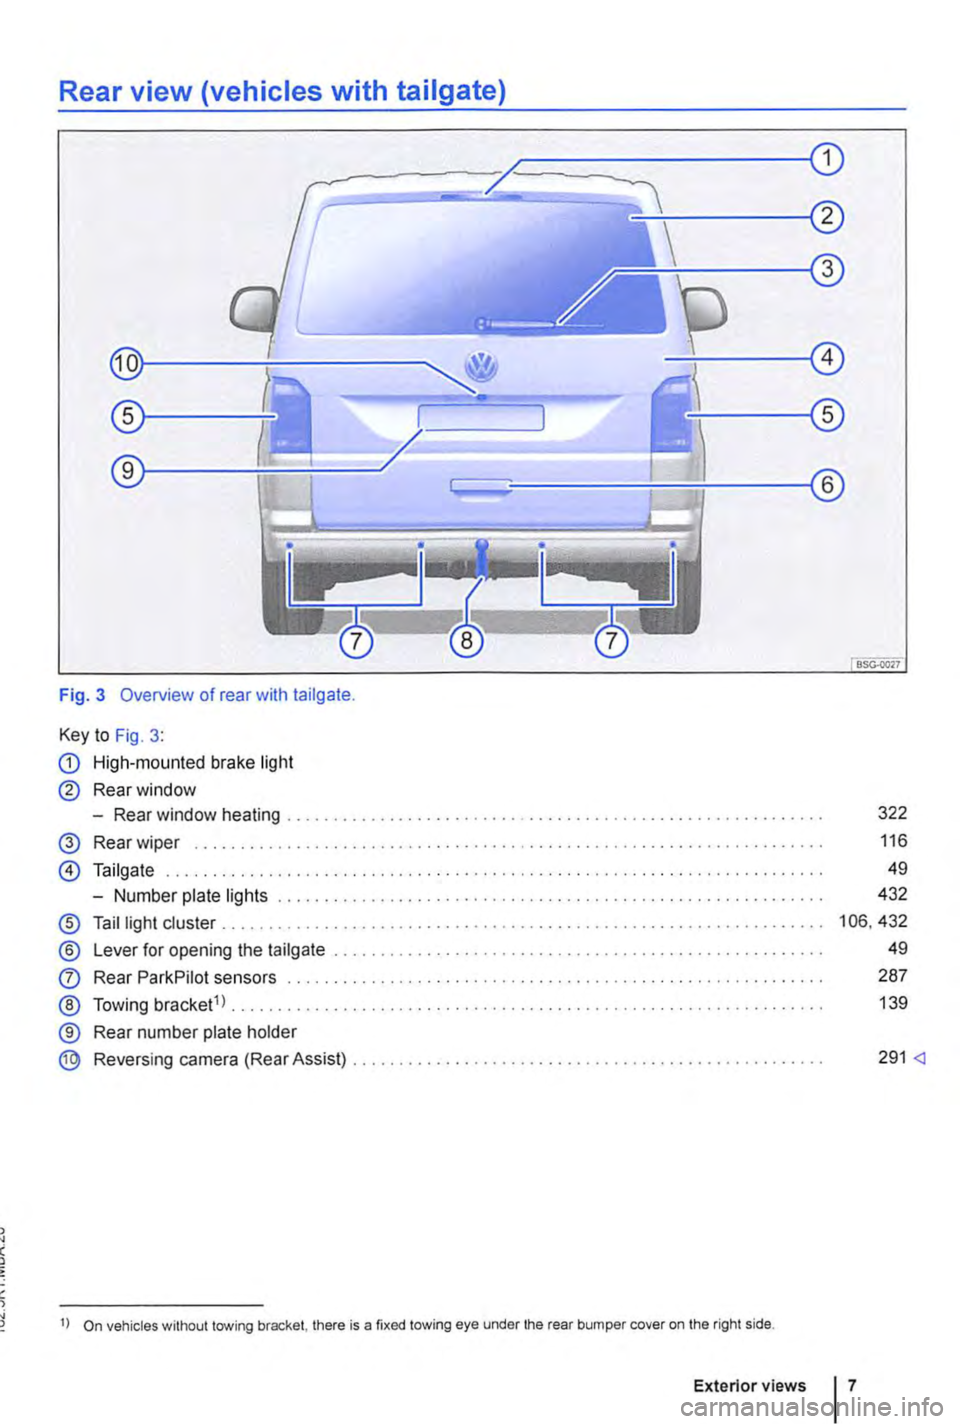 VOLKSWAGEN TRANSPORTER 2014  Owners Manual Rear view (vehicles with tailgate) 
Fig. 3 Overview of rear with tailgate. 
Key to Fig. 3: 
CD High-mounted brake light 
@ Rear window 
-Rear window heating ........................ . 
@ Rear wiper ..